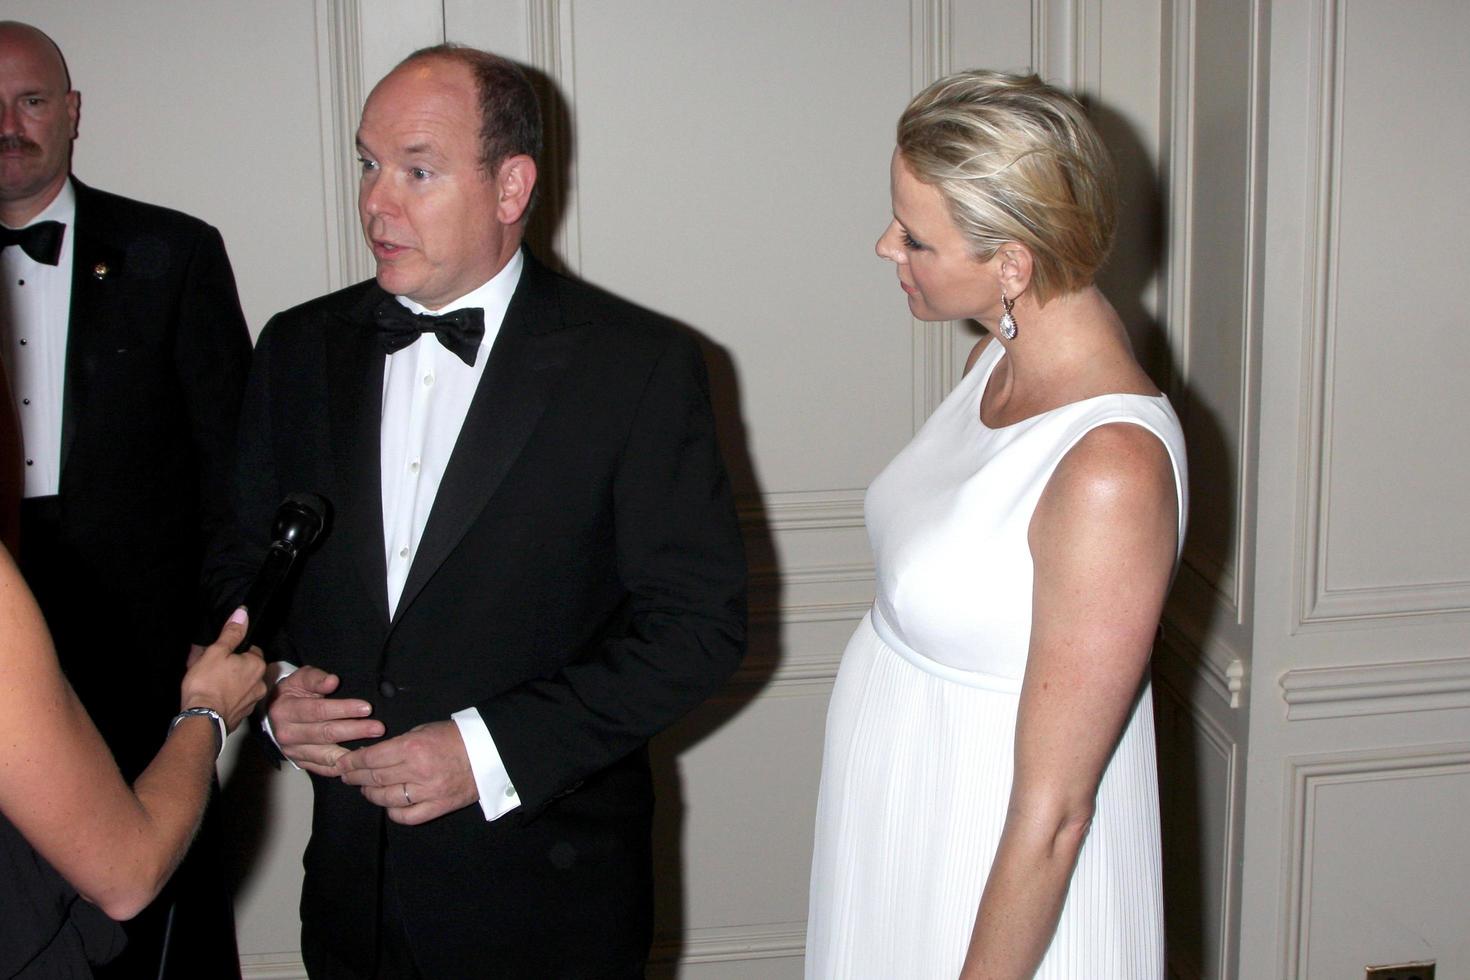 LOS ANGELES, OCT 8 - His Serene Highness Prince Albert II of Monaco, Her Serene Highness Princess Charlene of Monaco at the Princess Grace Foundation Gala 2014 on October 8, 2014 in Beverly Hills, CA photo